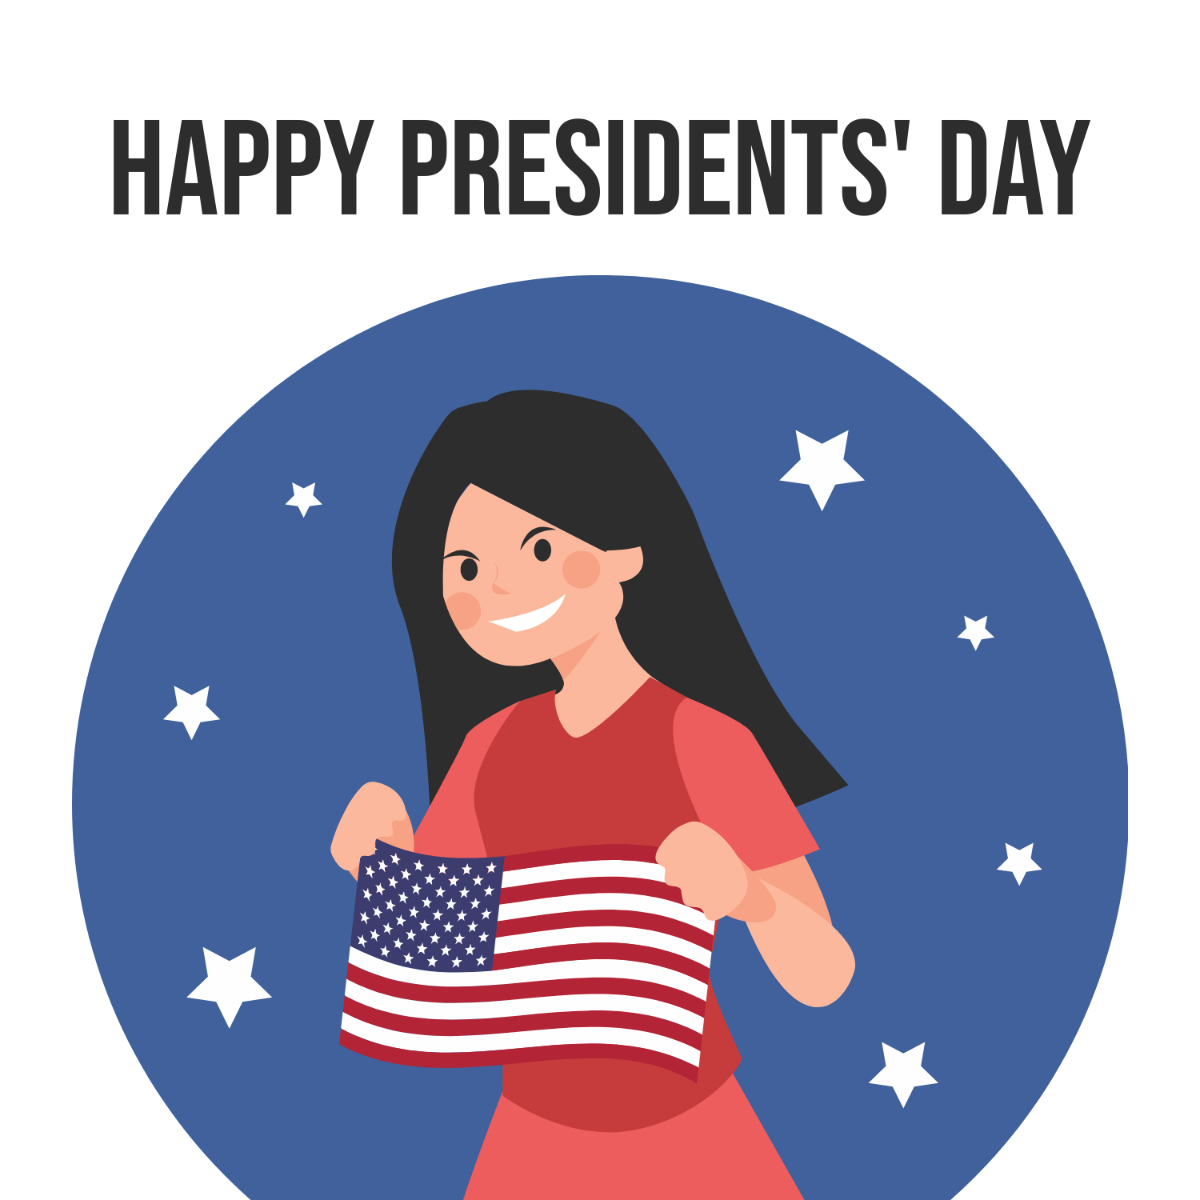 Presidents' Day Greeting Card Vector Template